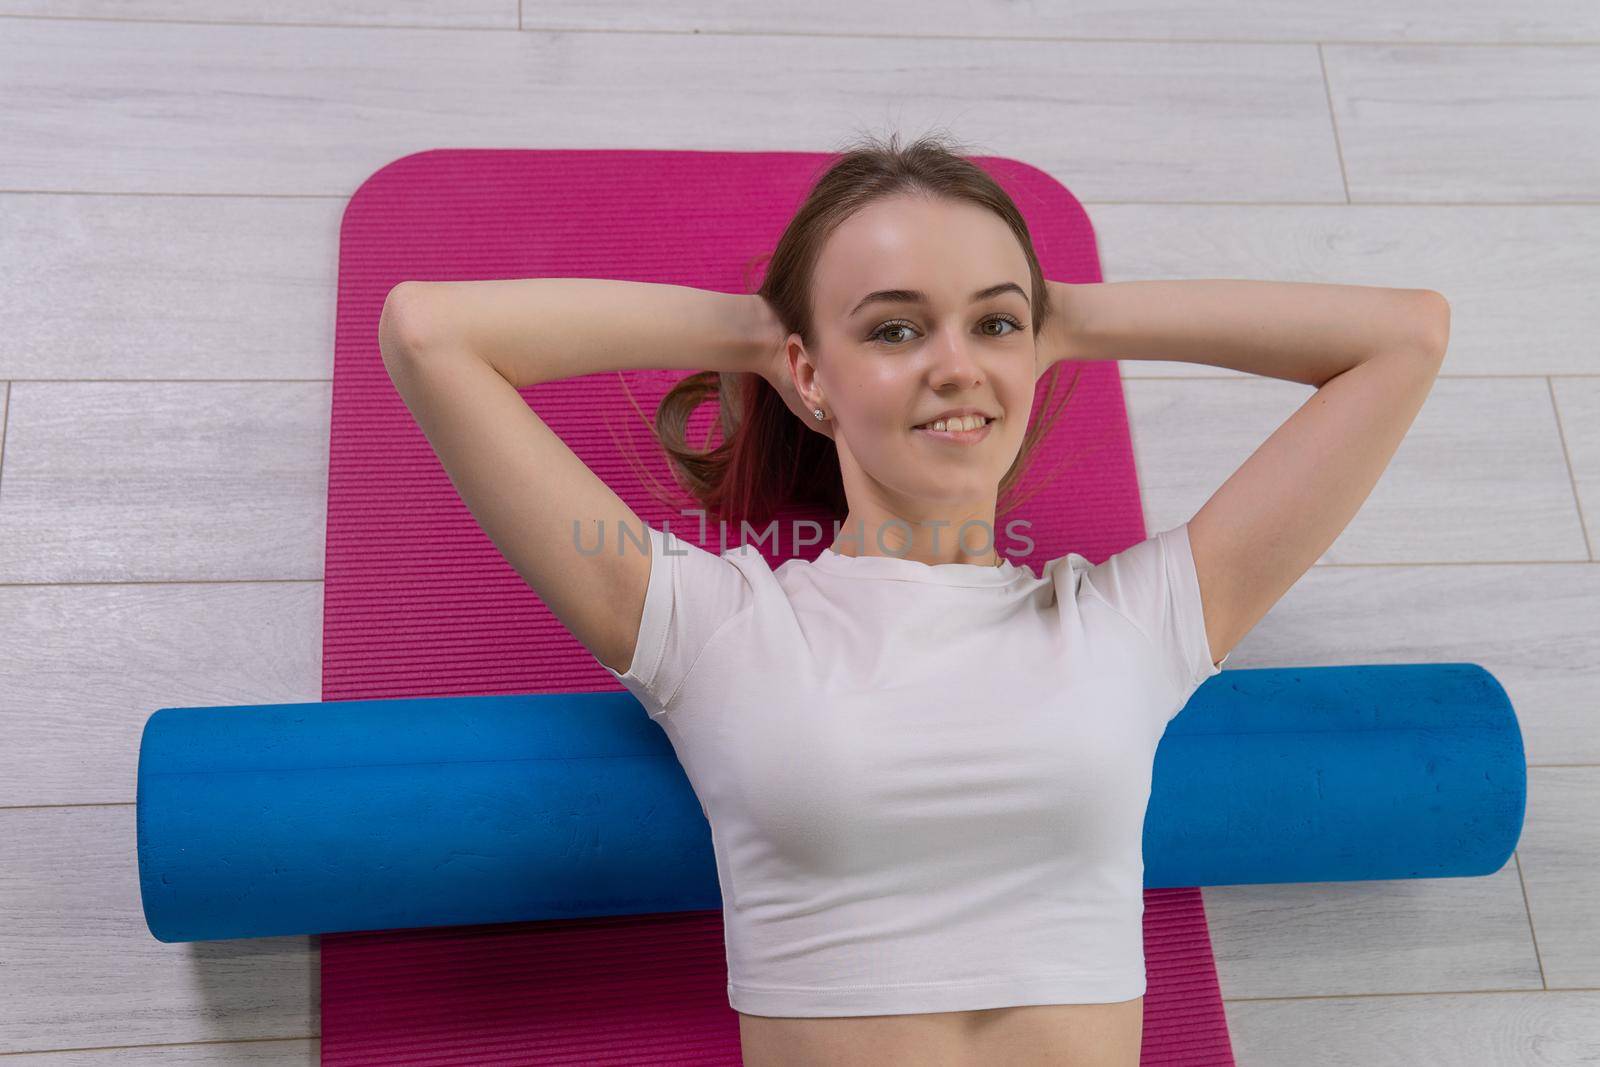 The mfr lies girl fitness the on roller red mat window strength, concept healthy lifestyle fit class from doing and yoga body, floor motivation. Plank position gym, pretty pose